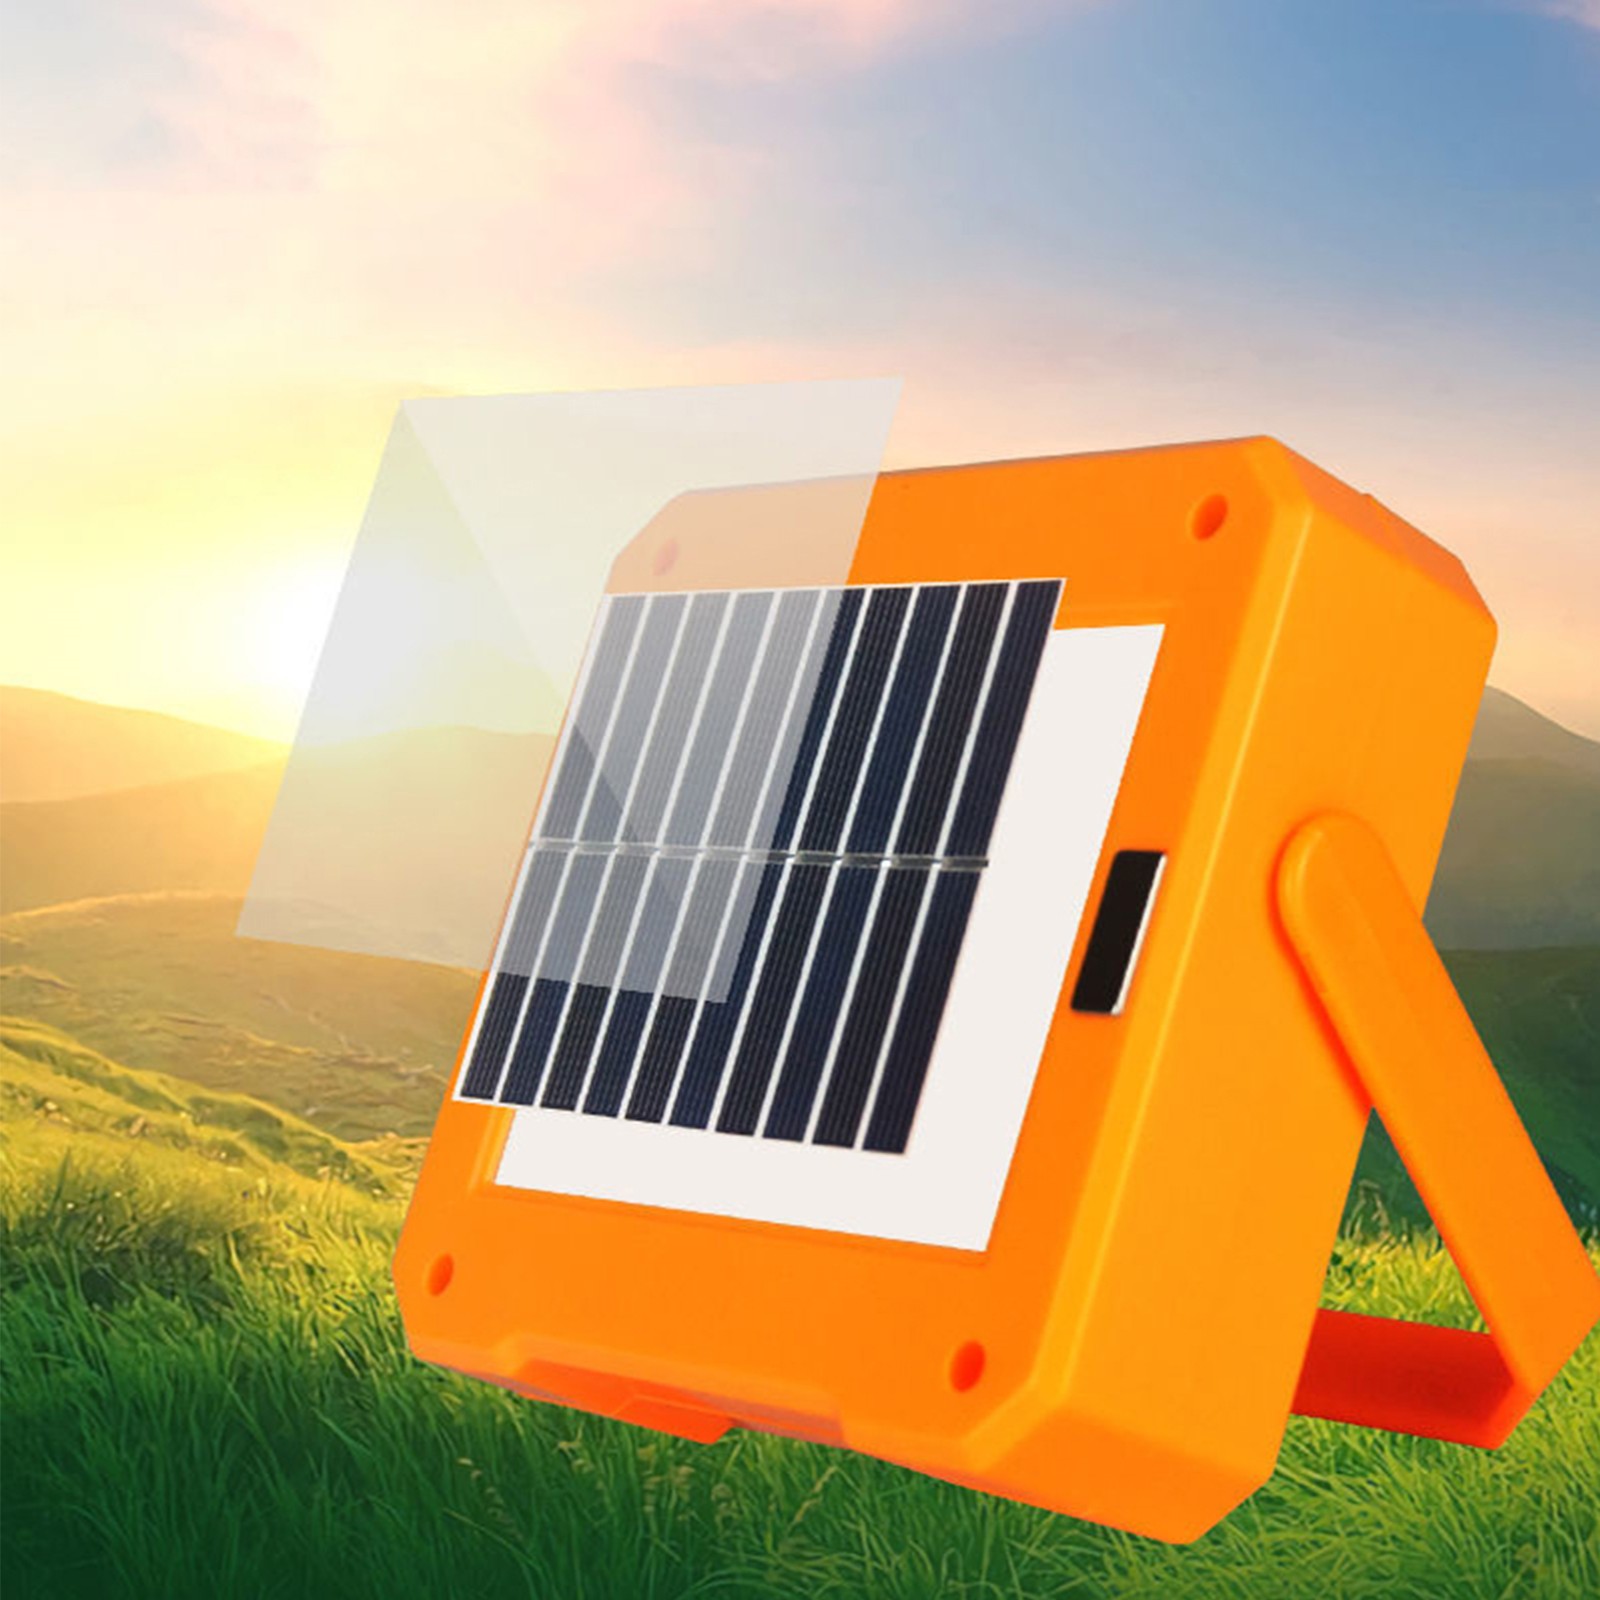 Portable Solar Led Work Light 6000mah Battery Usb Rechargeable Outdoor Waterproof Camping Tent Light Flashlight